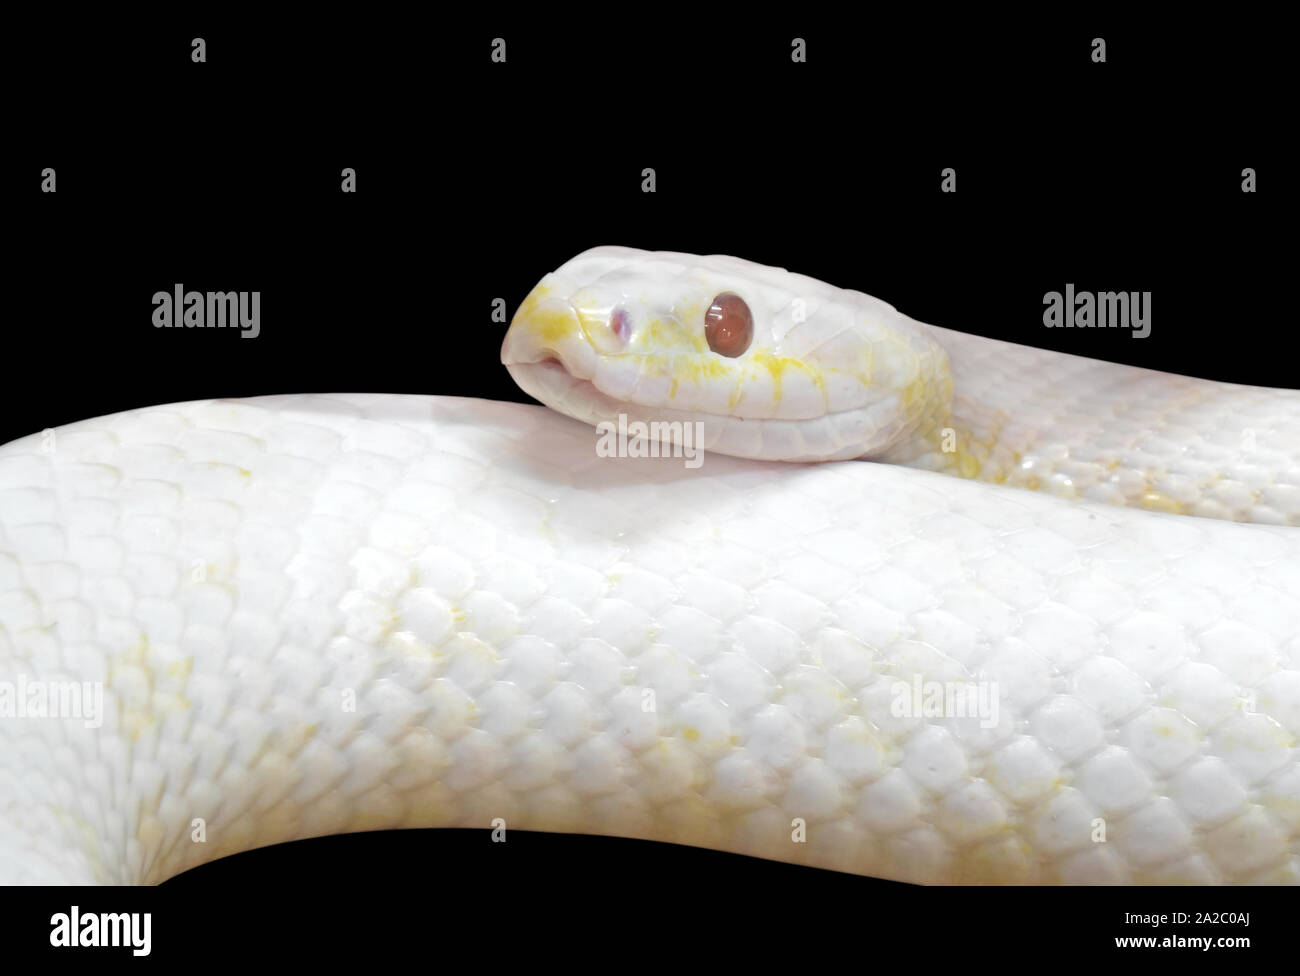 Closeup Albino Black Rat Snake Coiled Isolated on Black Background with Clipping Path Stock Photo